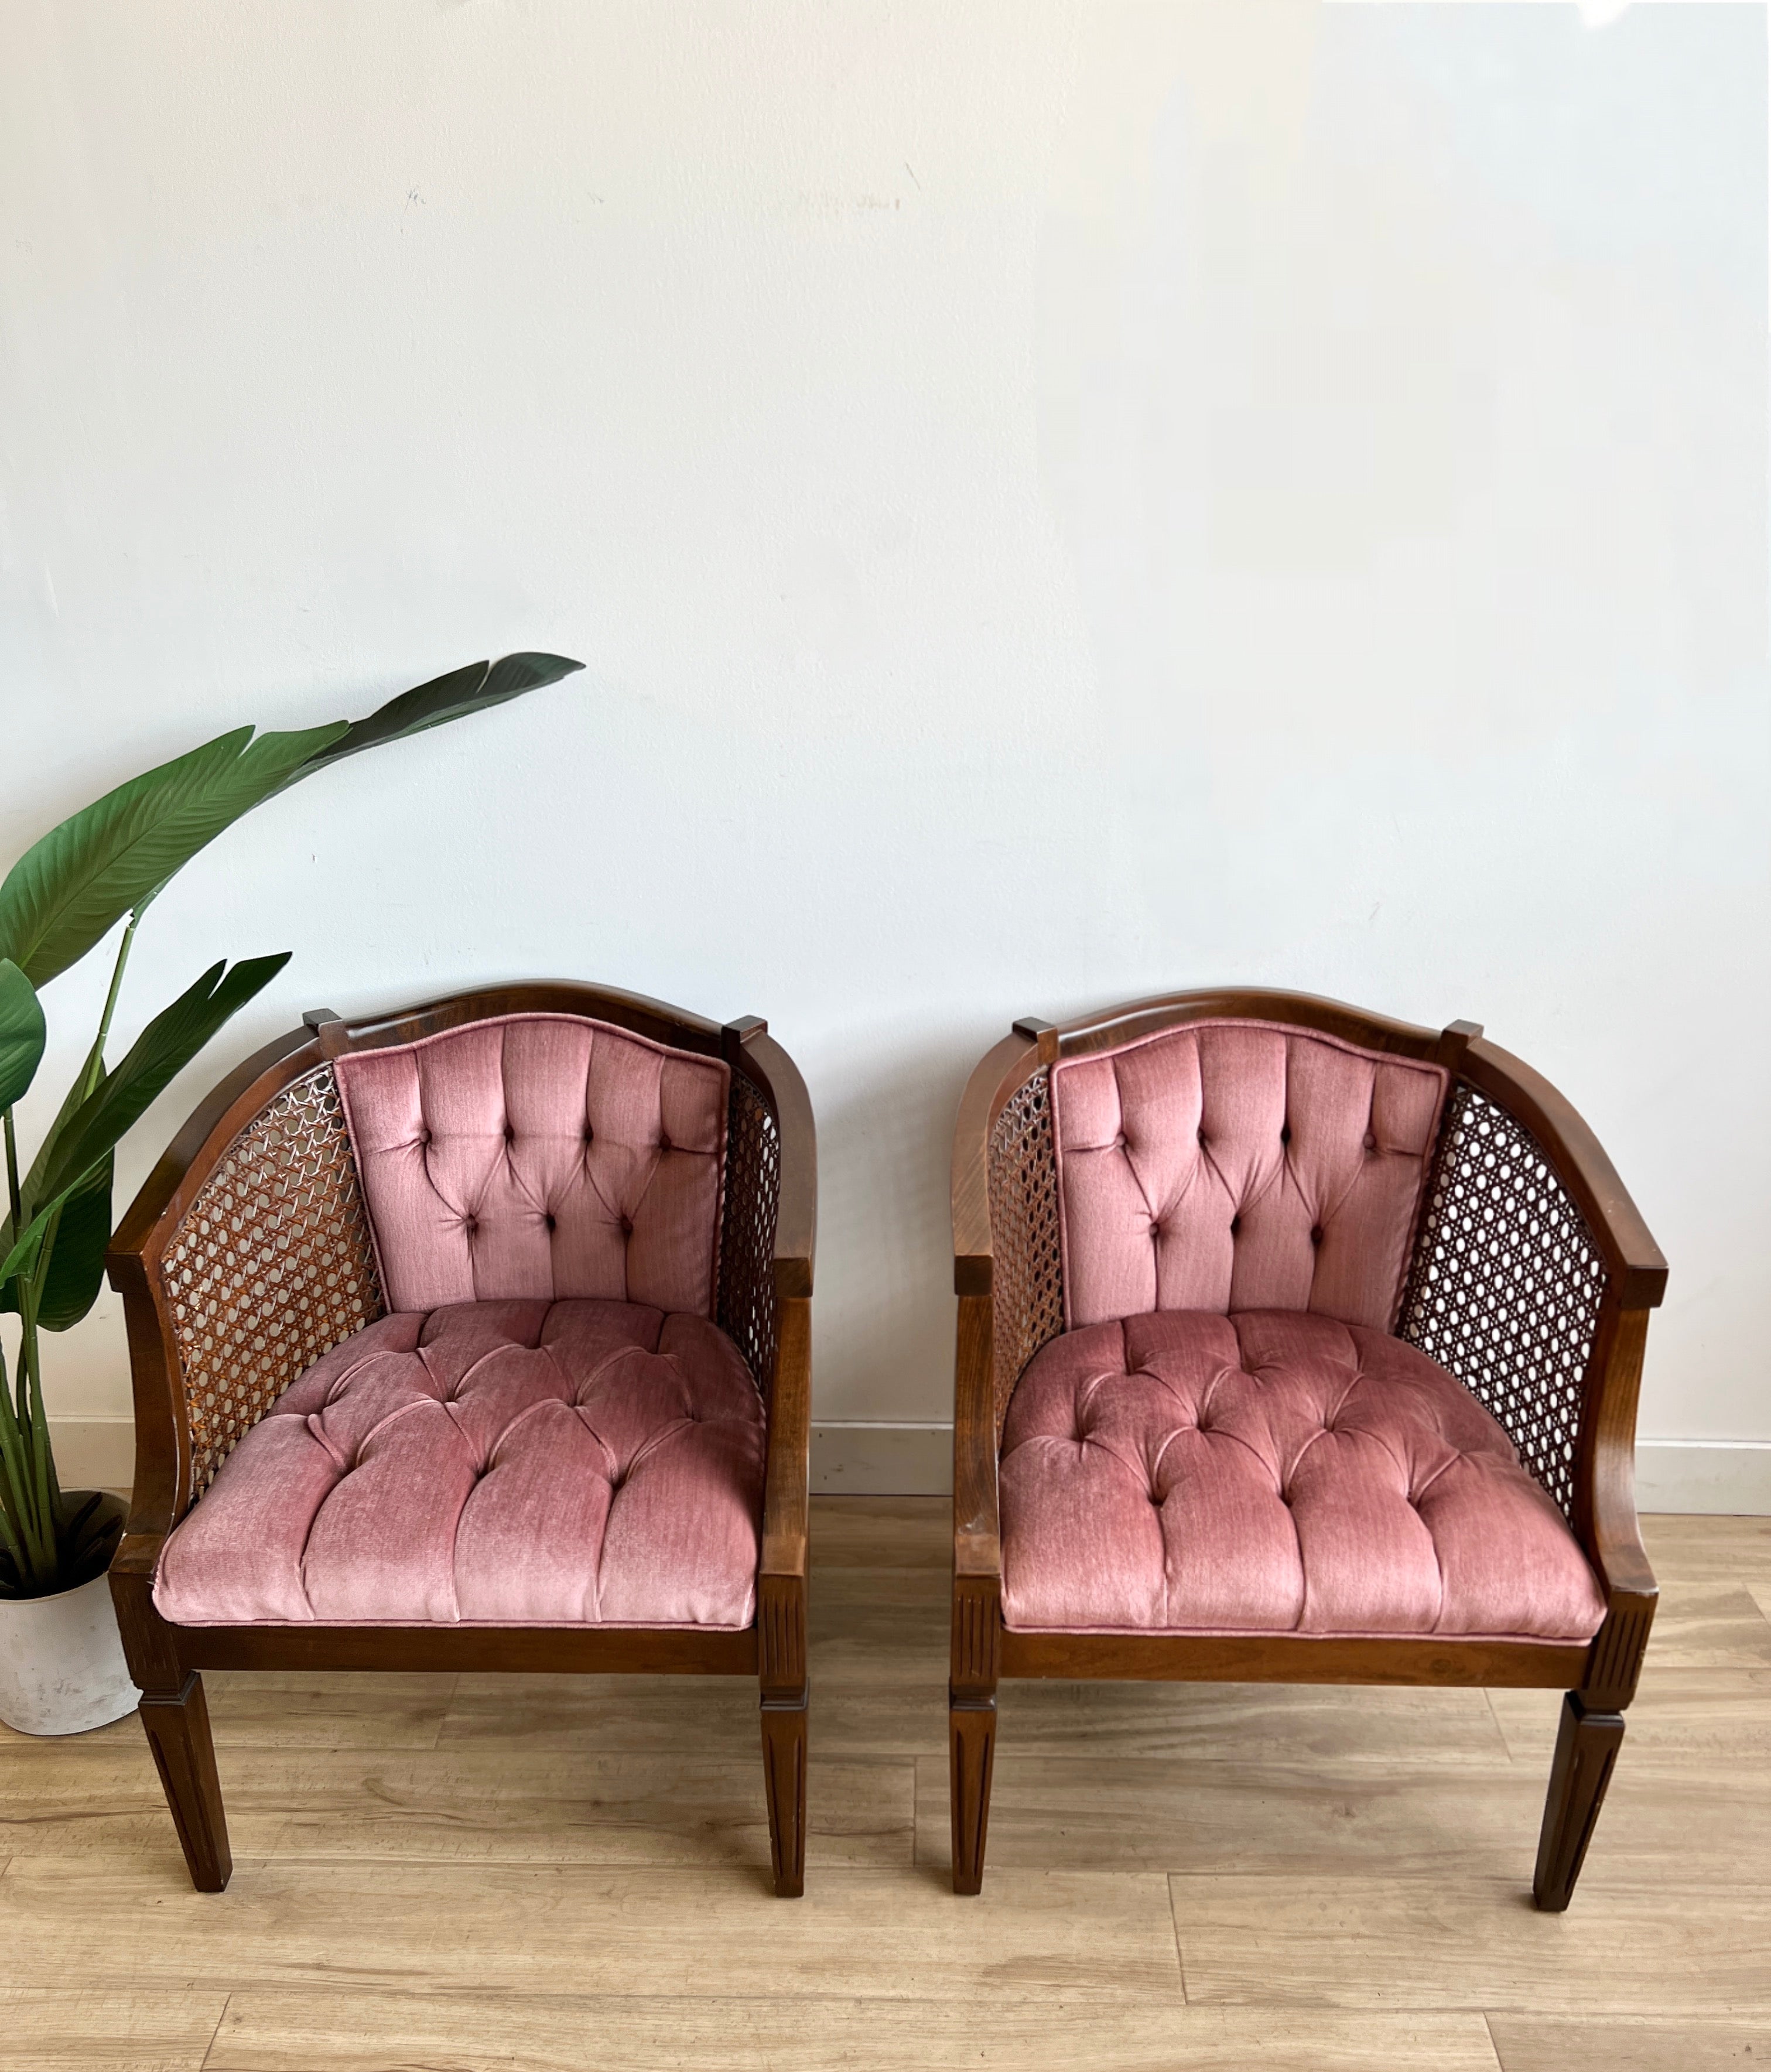 Pair of Vintage Tufted Velvet Chairs